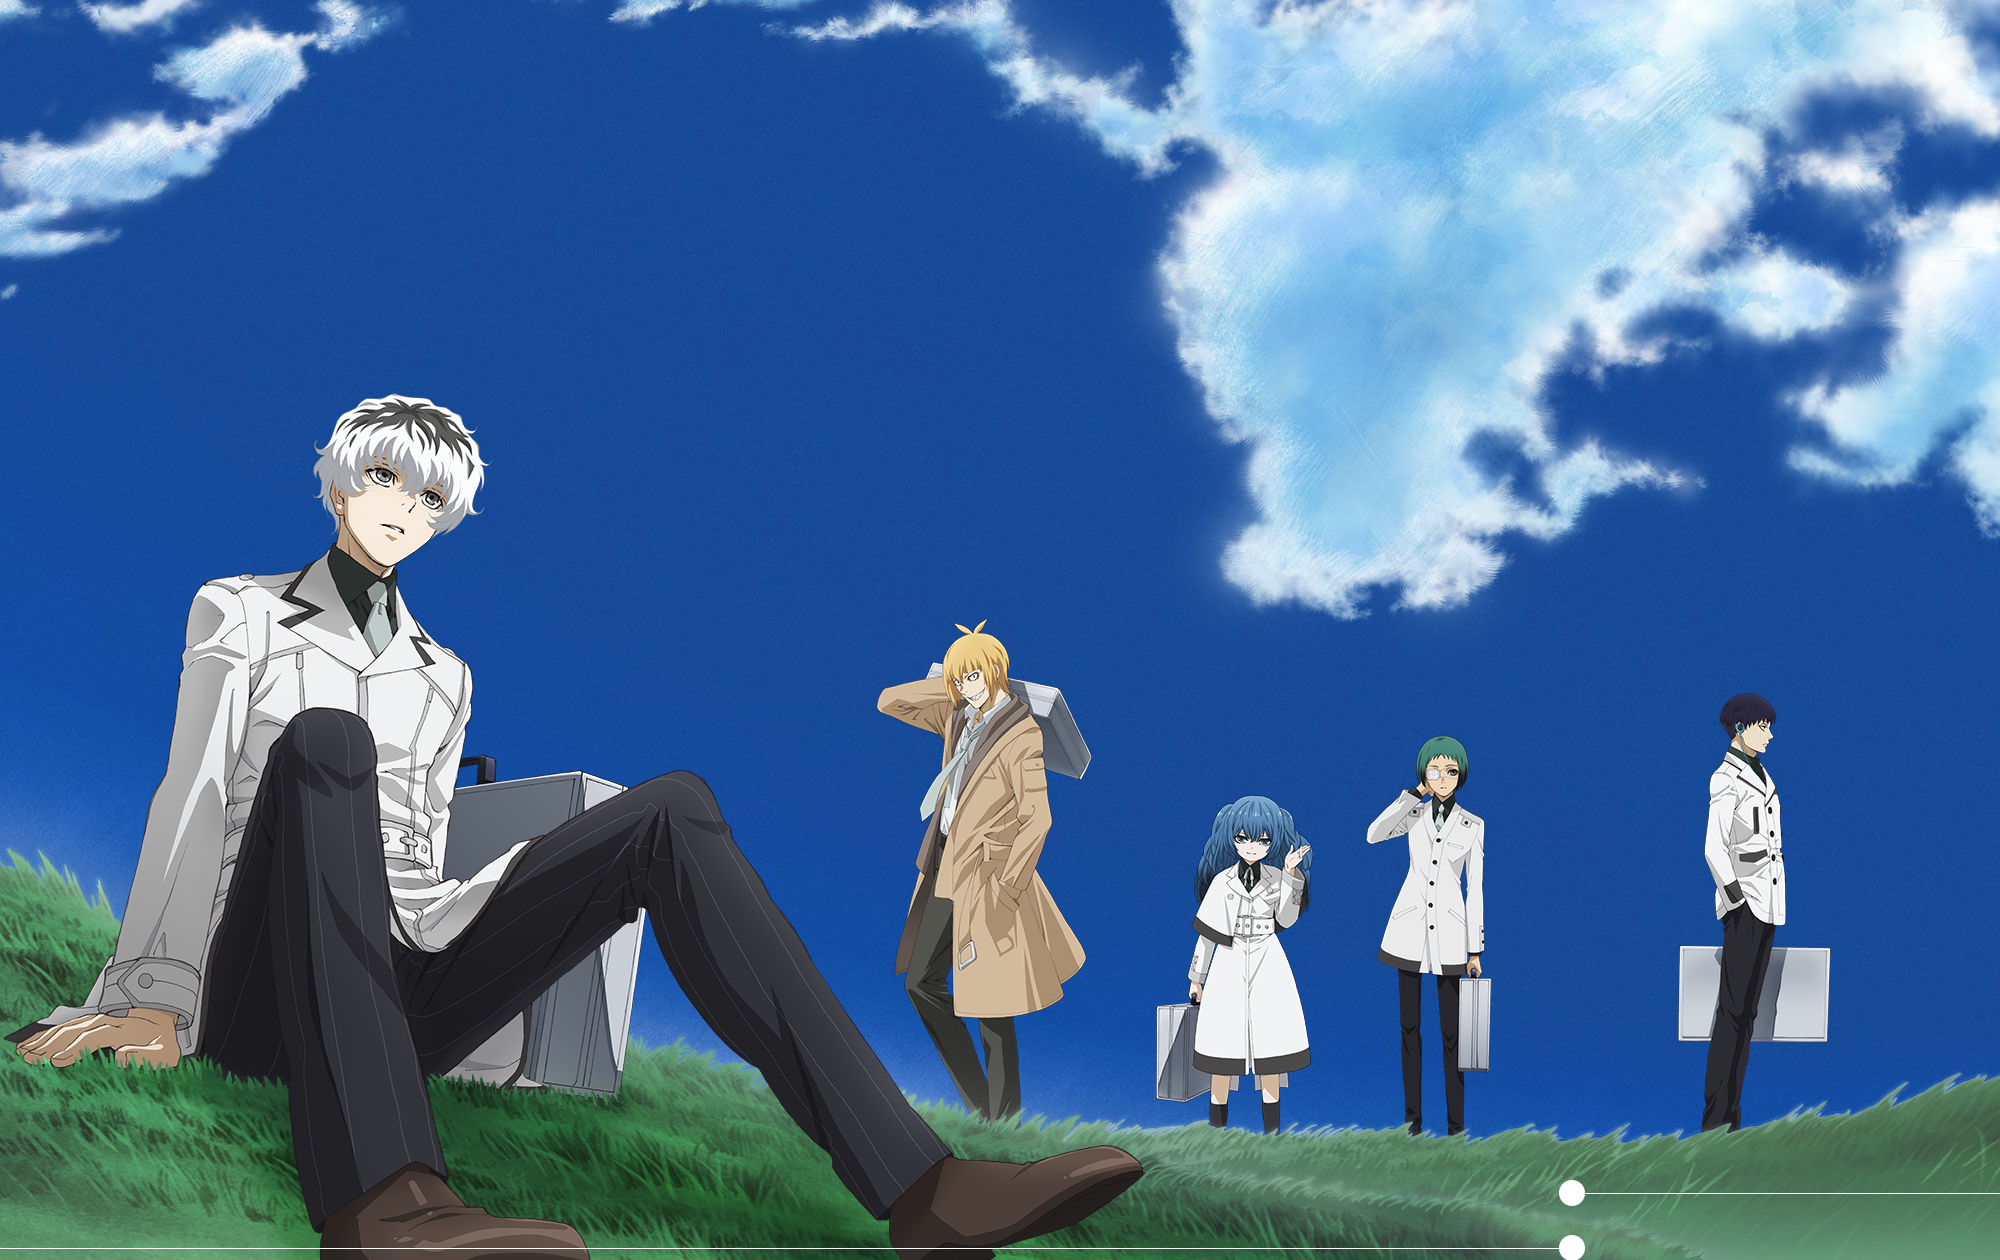 How To Watch 'Tokyo Ghoul' in Order